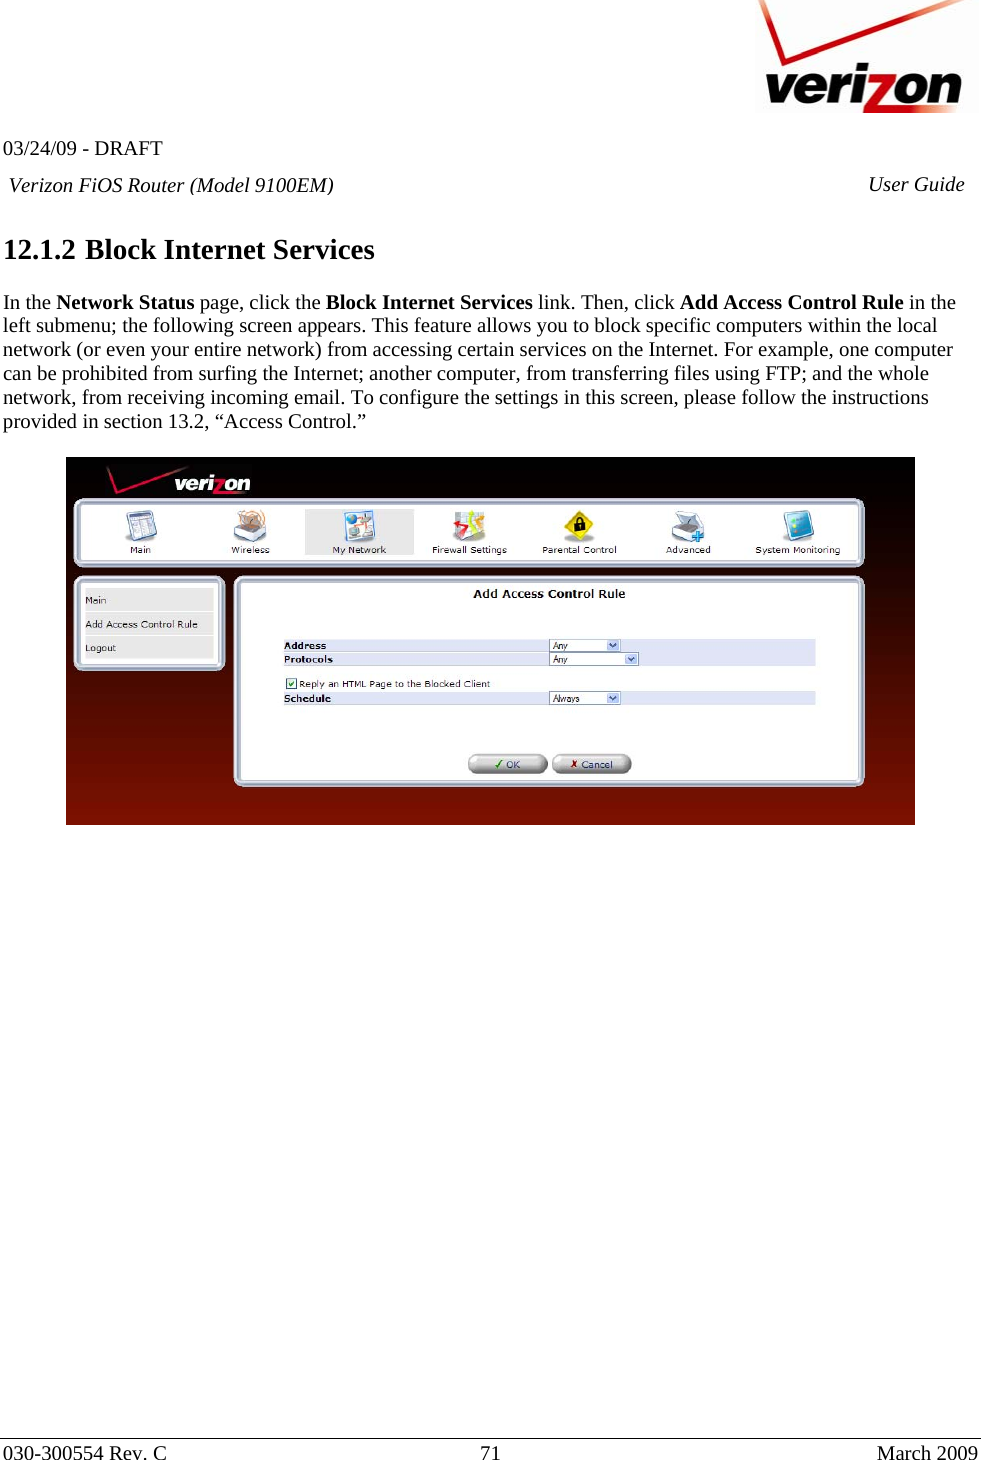   03/24/09 - DRAFT   030-300554 Rev. C  71      March 2009  Verizon FiOS Router (Model 9100EM) User Guide 12.1.2  Block Internet Services  In the Network Status page, click the Block Internet Services link. Then, click Add Access Control Rule in the left submenu; the following screen appears. This feature allows you to block specific computers within the local network (or even your entire network) from accessing certain services on the Internet. For example, one computer can be prohibited from surfing the Internet; another computer, from transferring files using FTP; and the whole network, from receiving incoming email. To configure the settings in this screen, please follow the instructions provided in section 13.2, “Access Control.”                             